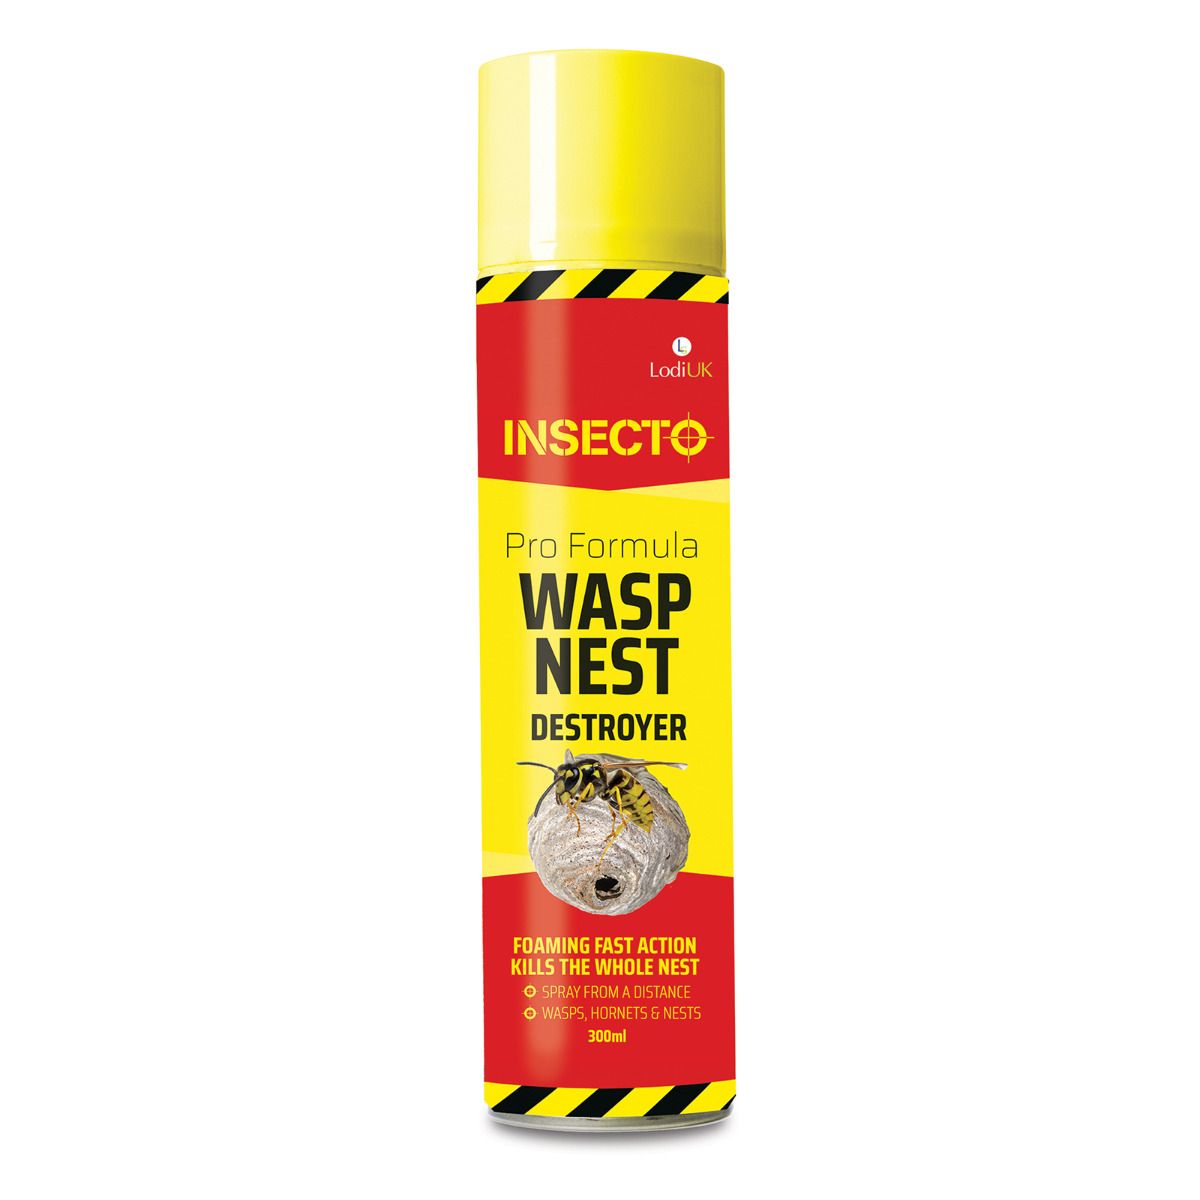 Insecto Wasp Nest Foam Destroyer 300ml